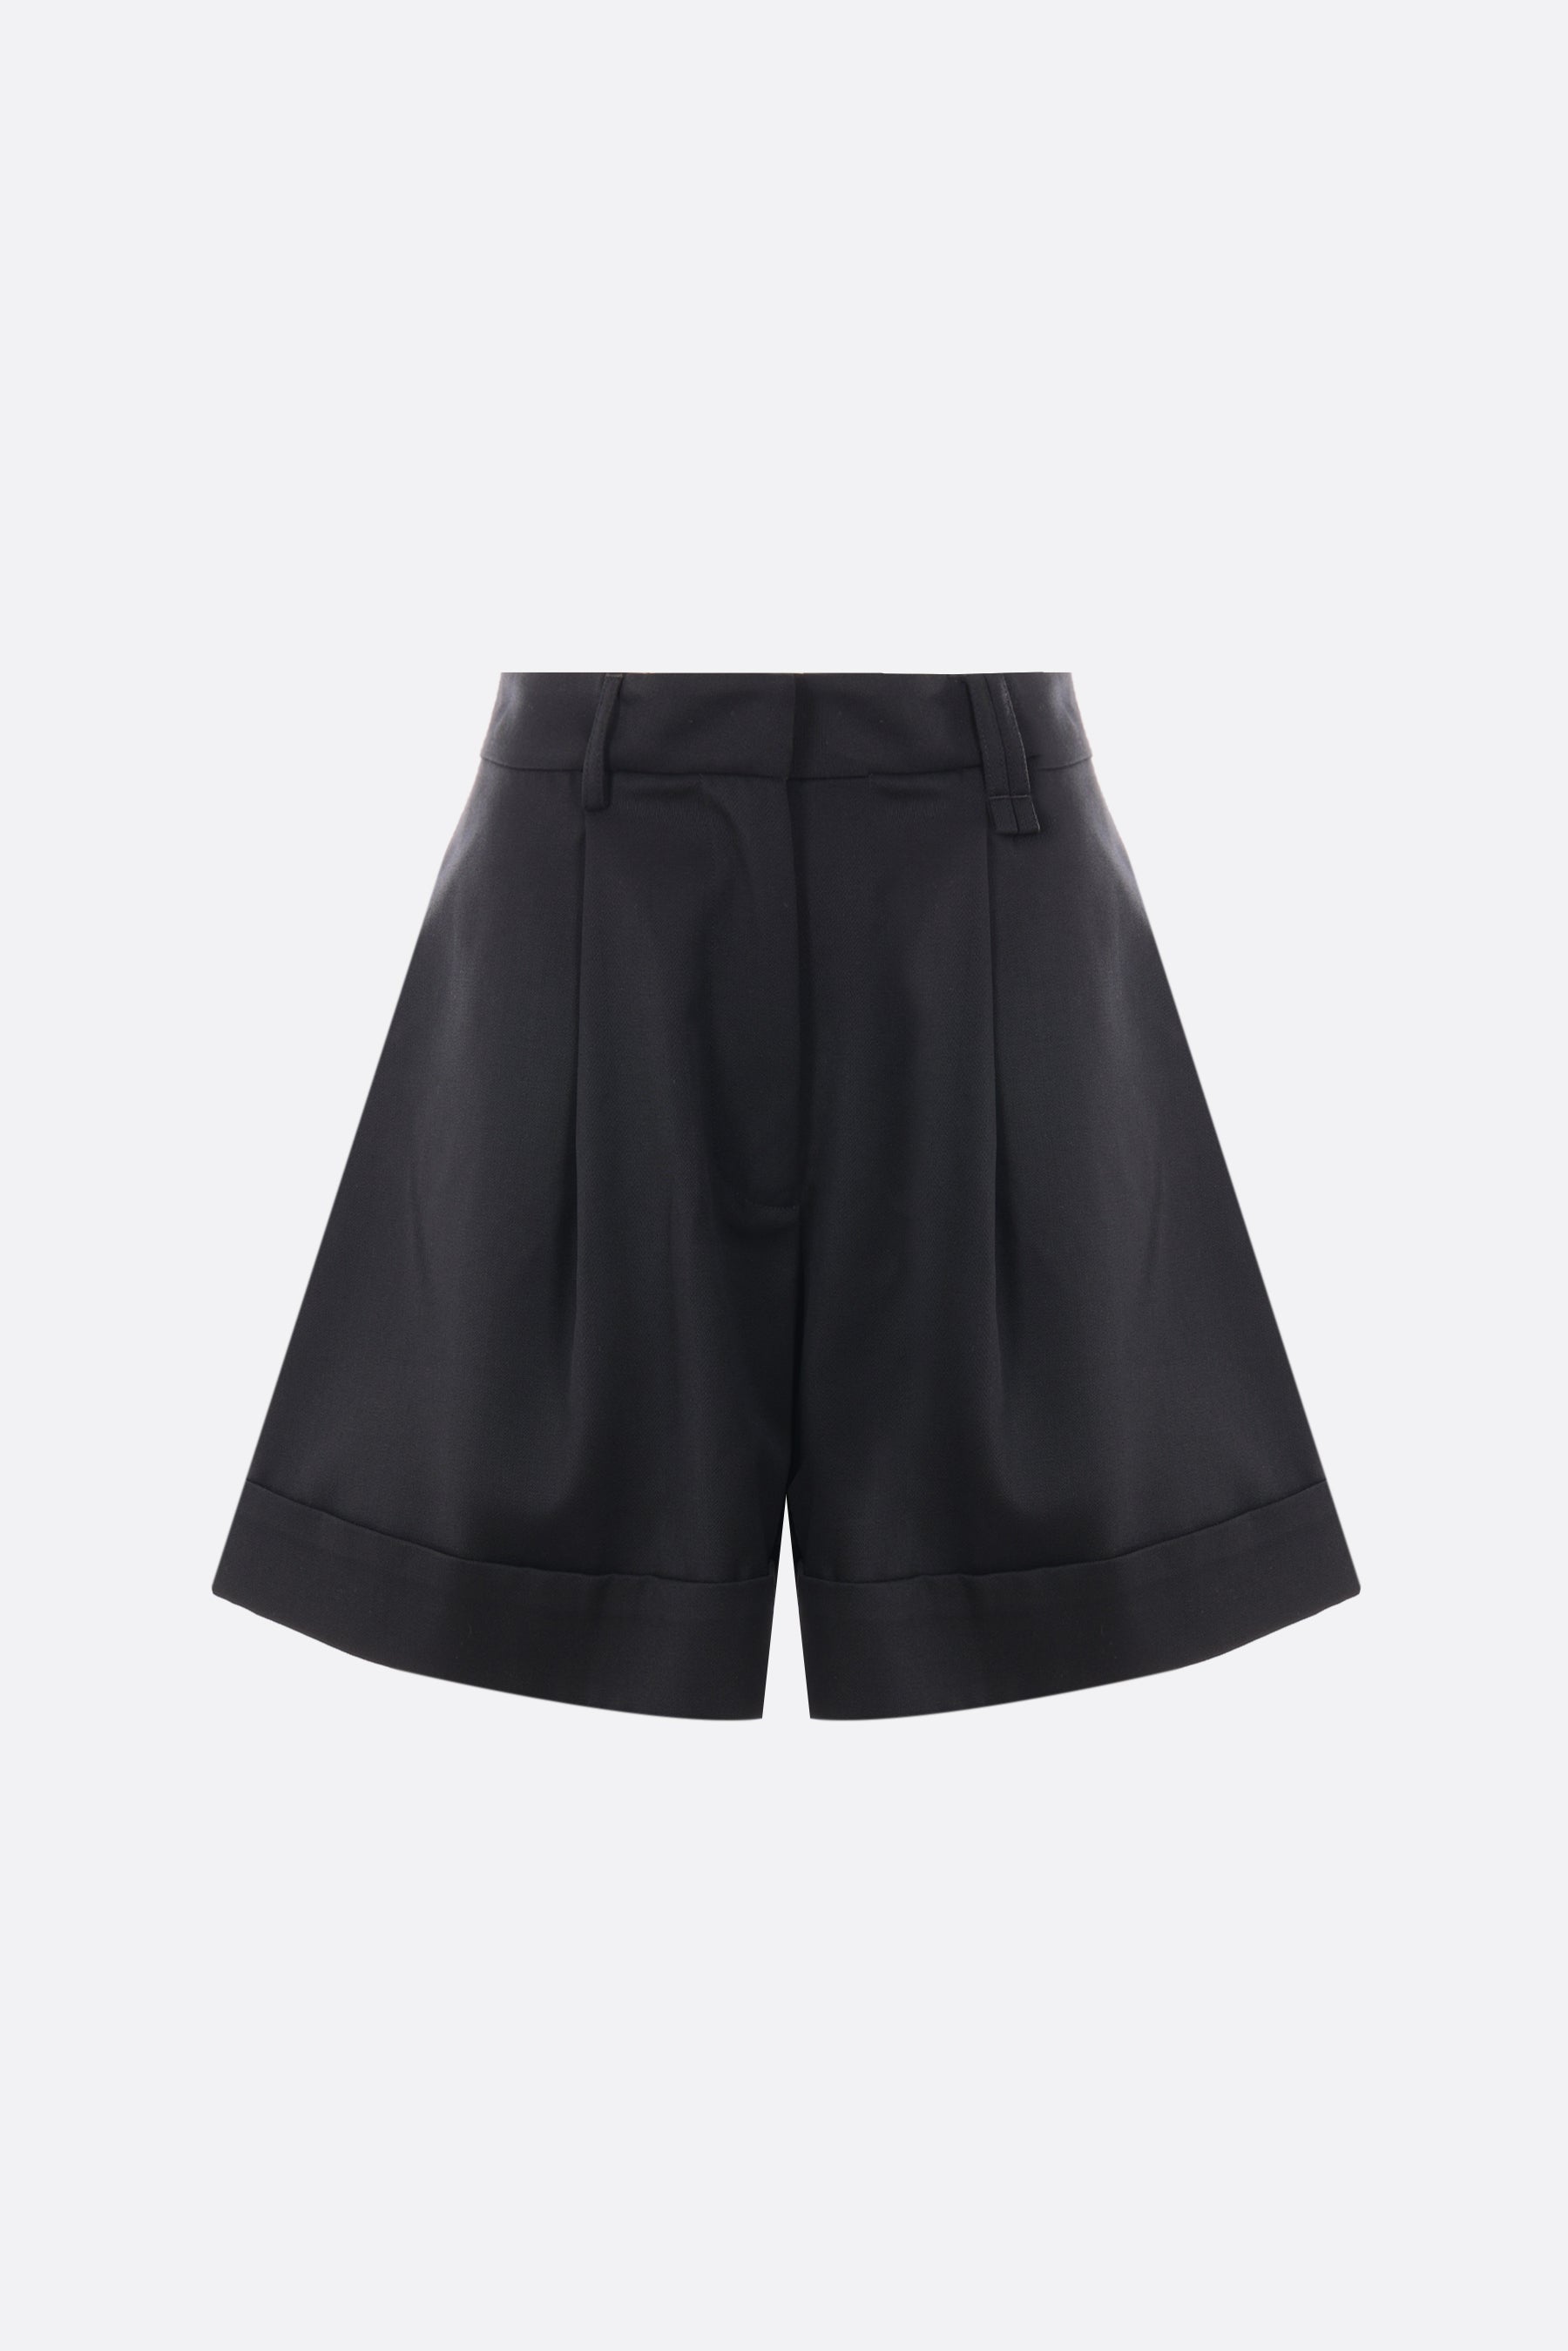 wool blend darted shorts